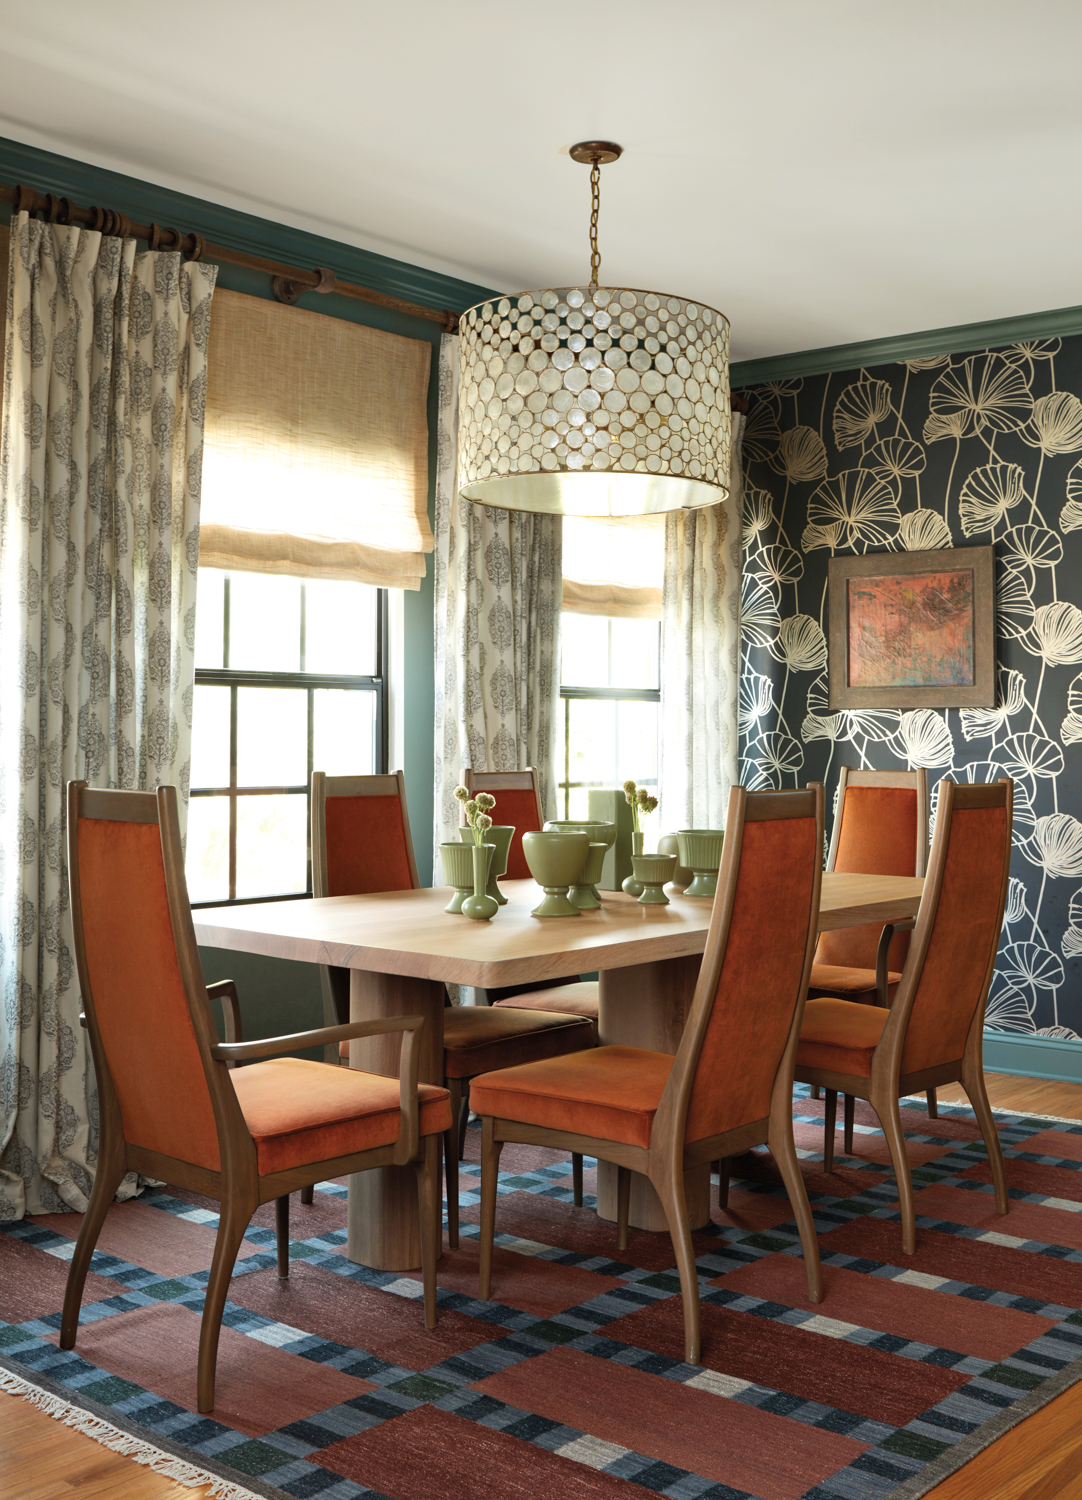 A rectangular, wood dining table circled by tall chairs in an orange fabric, atop a geometric rug and facing an Art Deco-style wallpaper